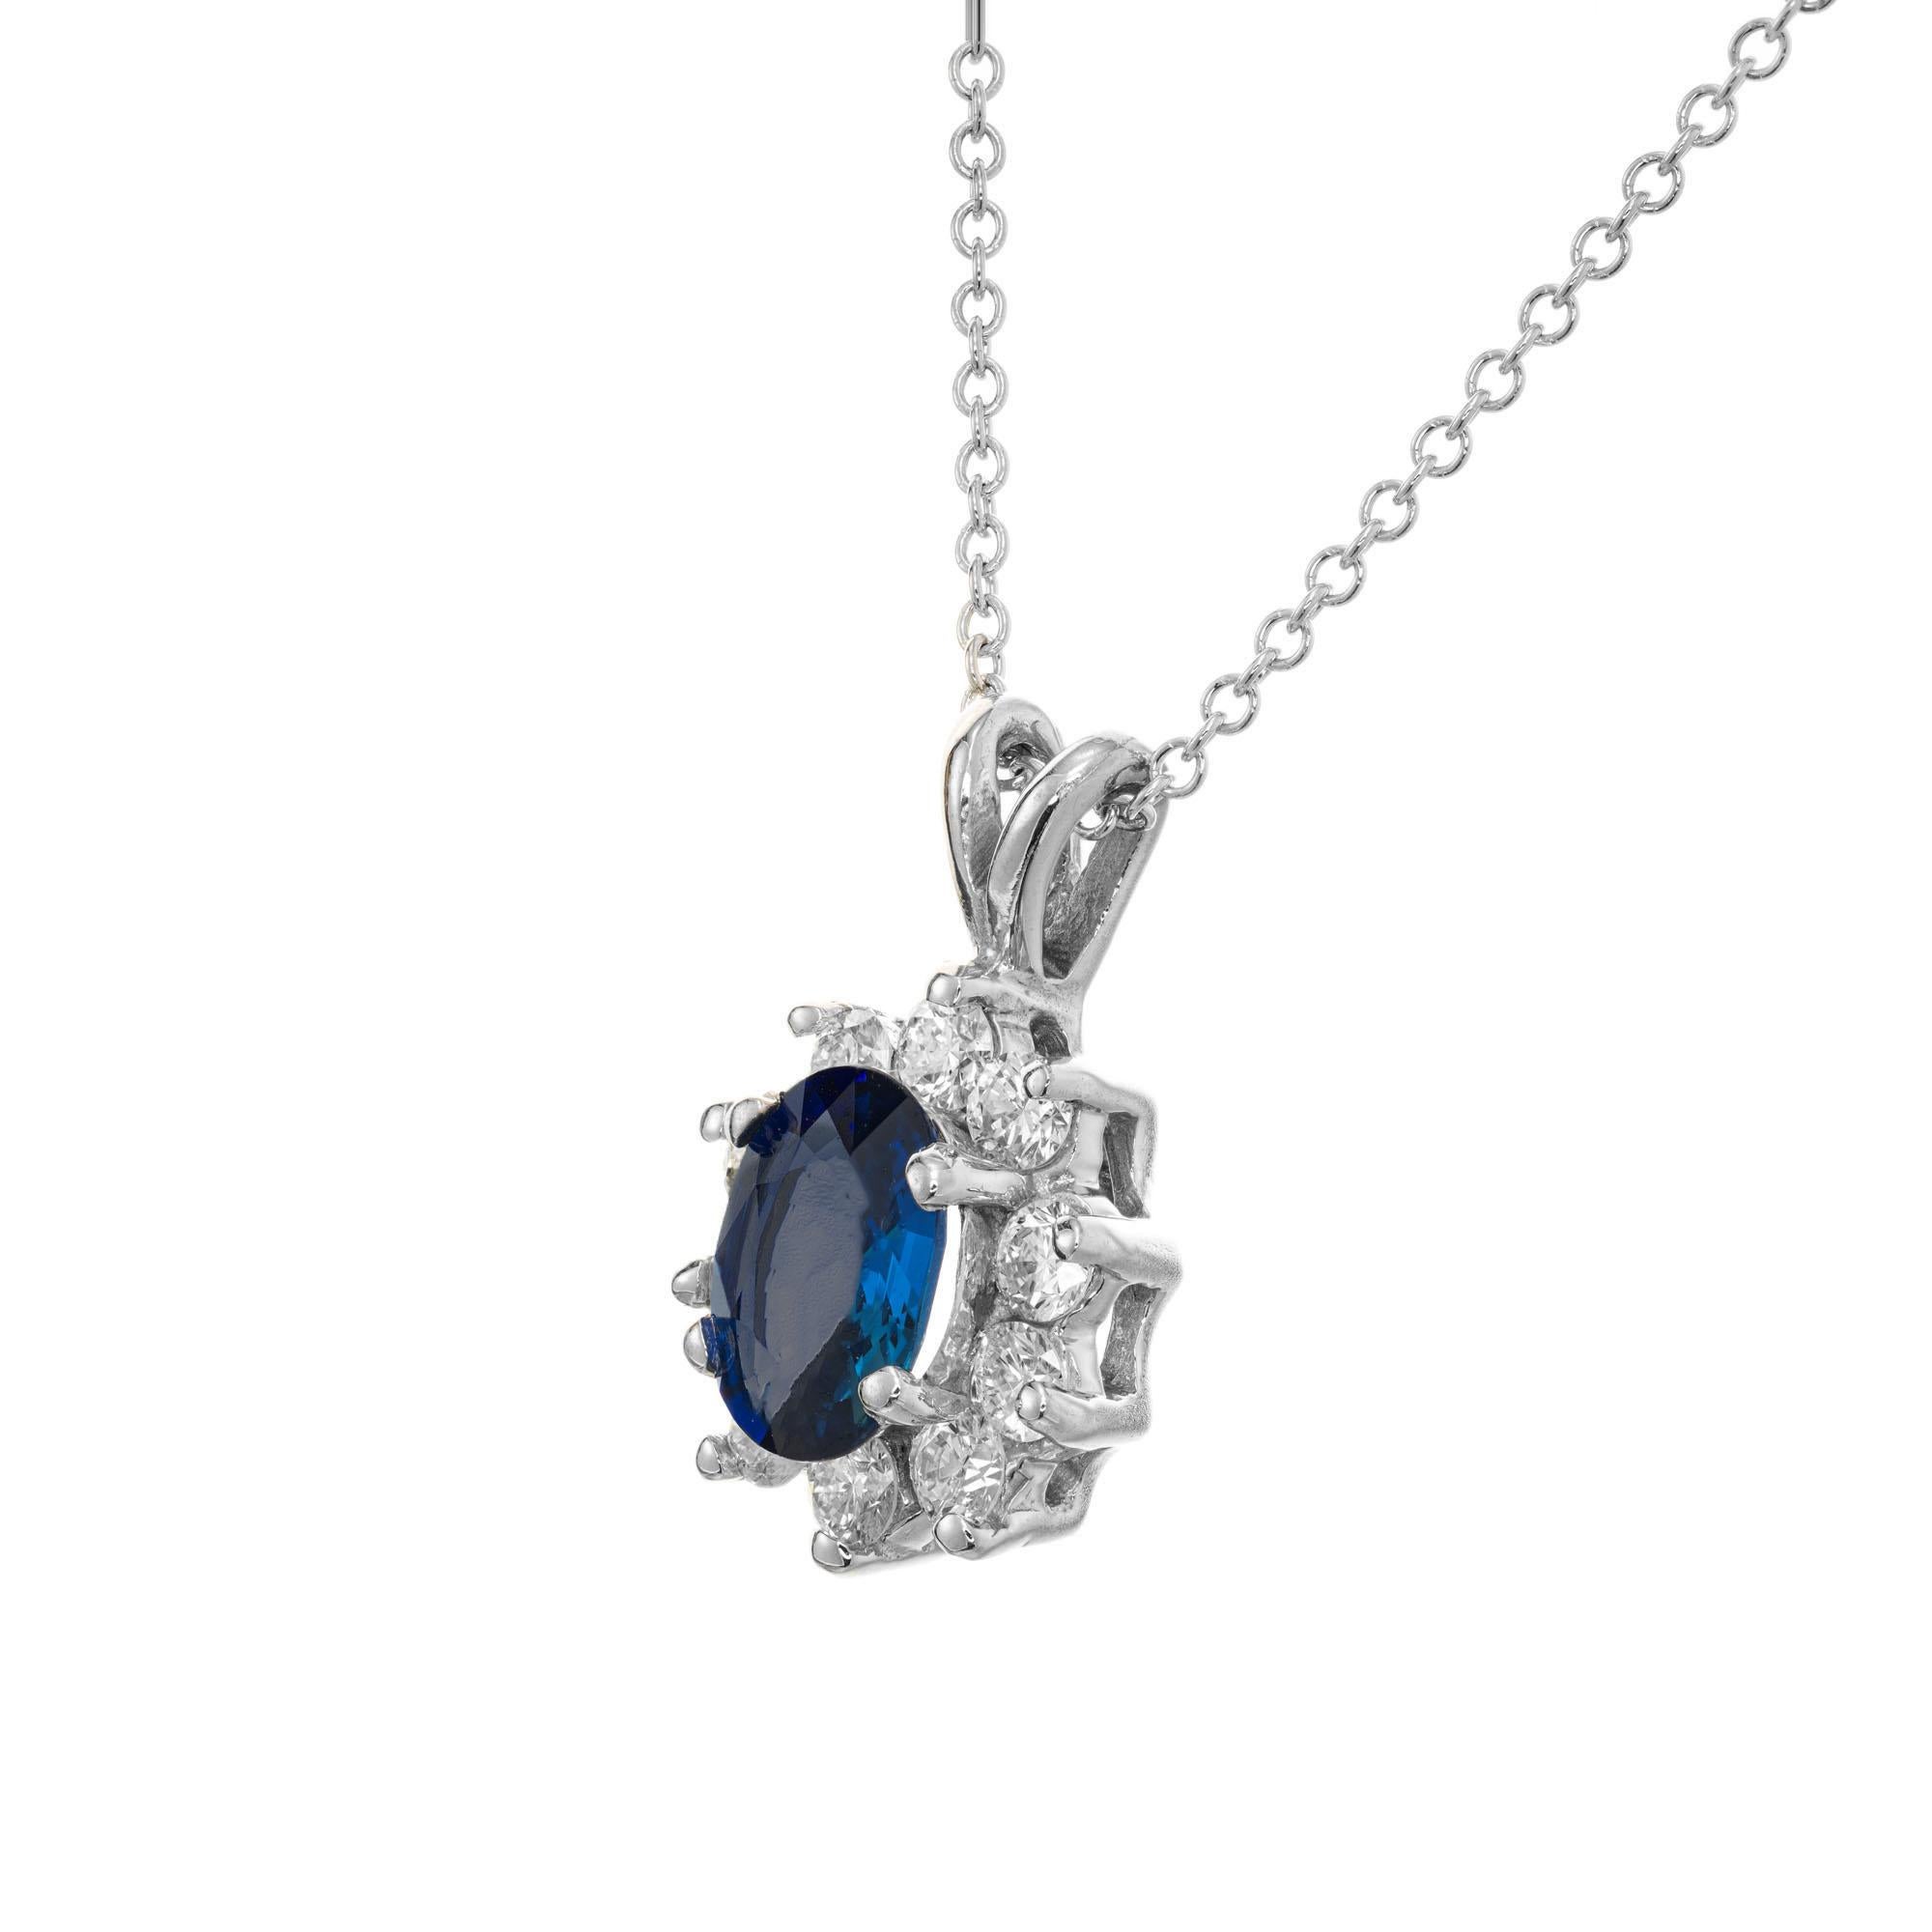 Cornflower blue Sapphire and diamond pendant necklace. Oval sapphire with a halo of 10 round ideal full cut diamonds in 18k white gold. 17.50 inch chain. 

2 cornflower blue oval Sapphire, approx. total weight 1.00cts, VS2, 7 x 5mm, natural color